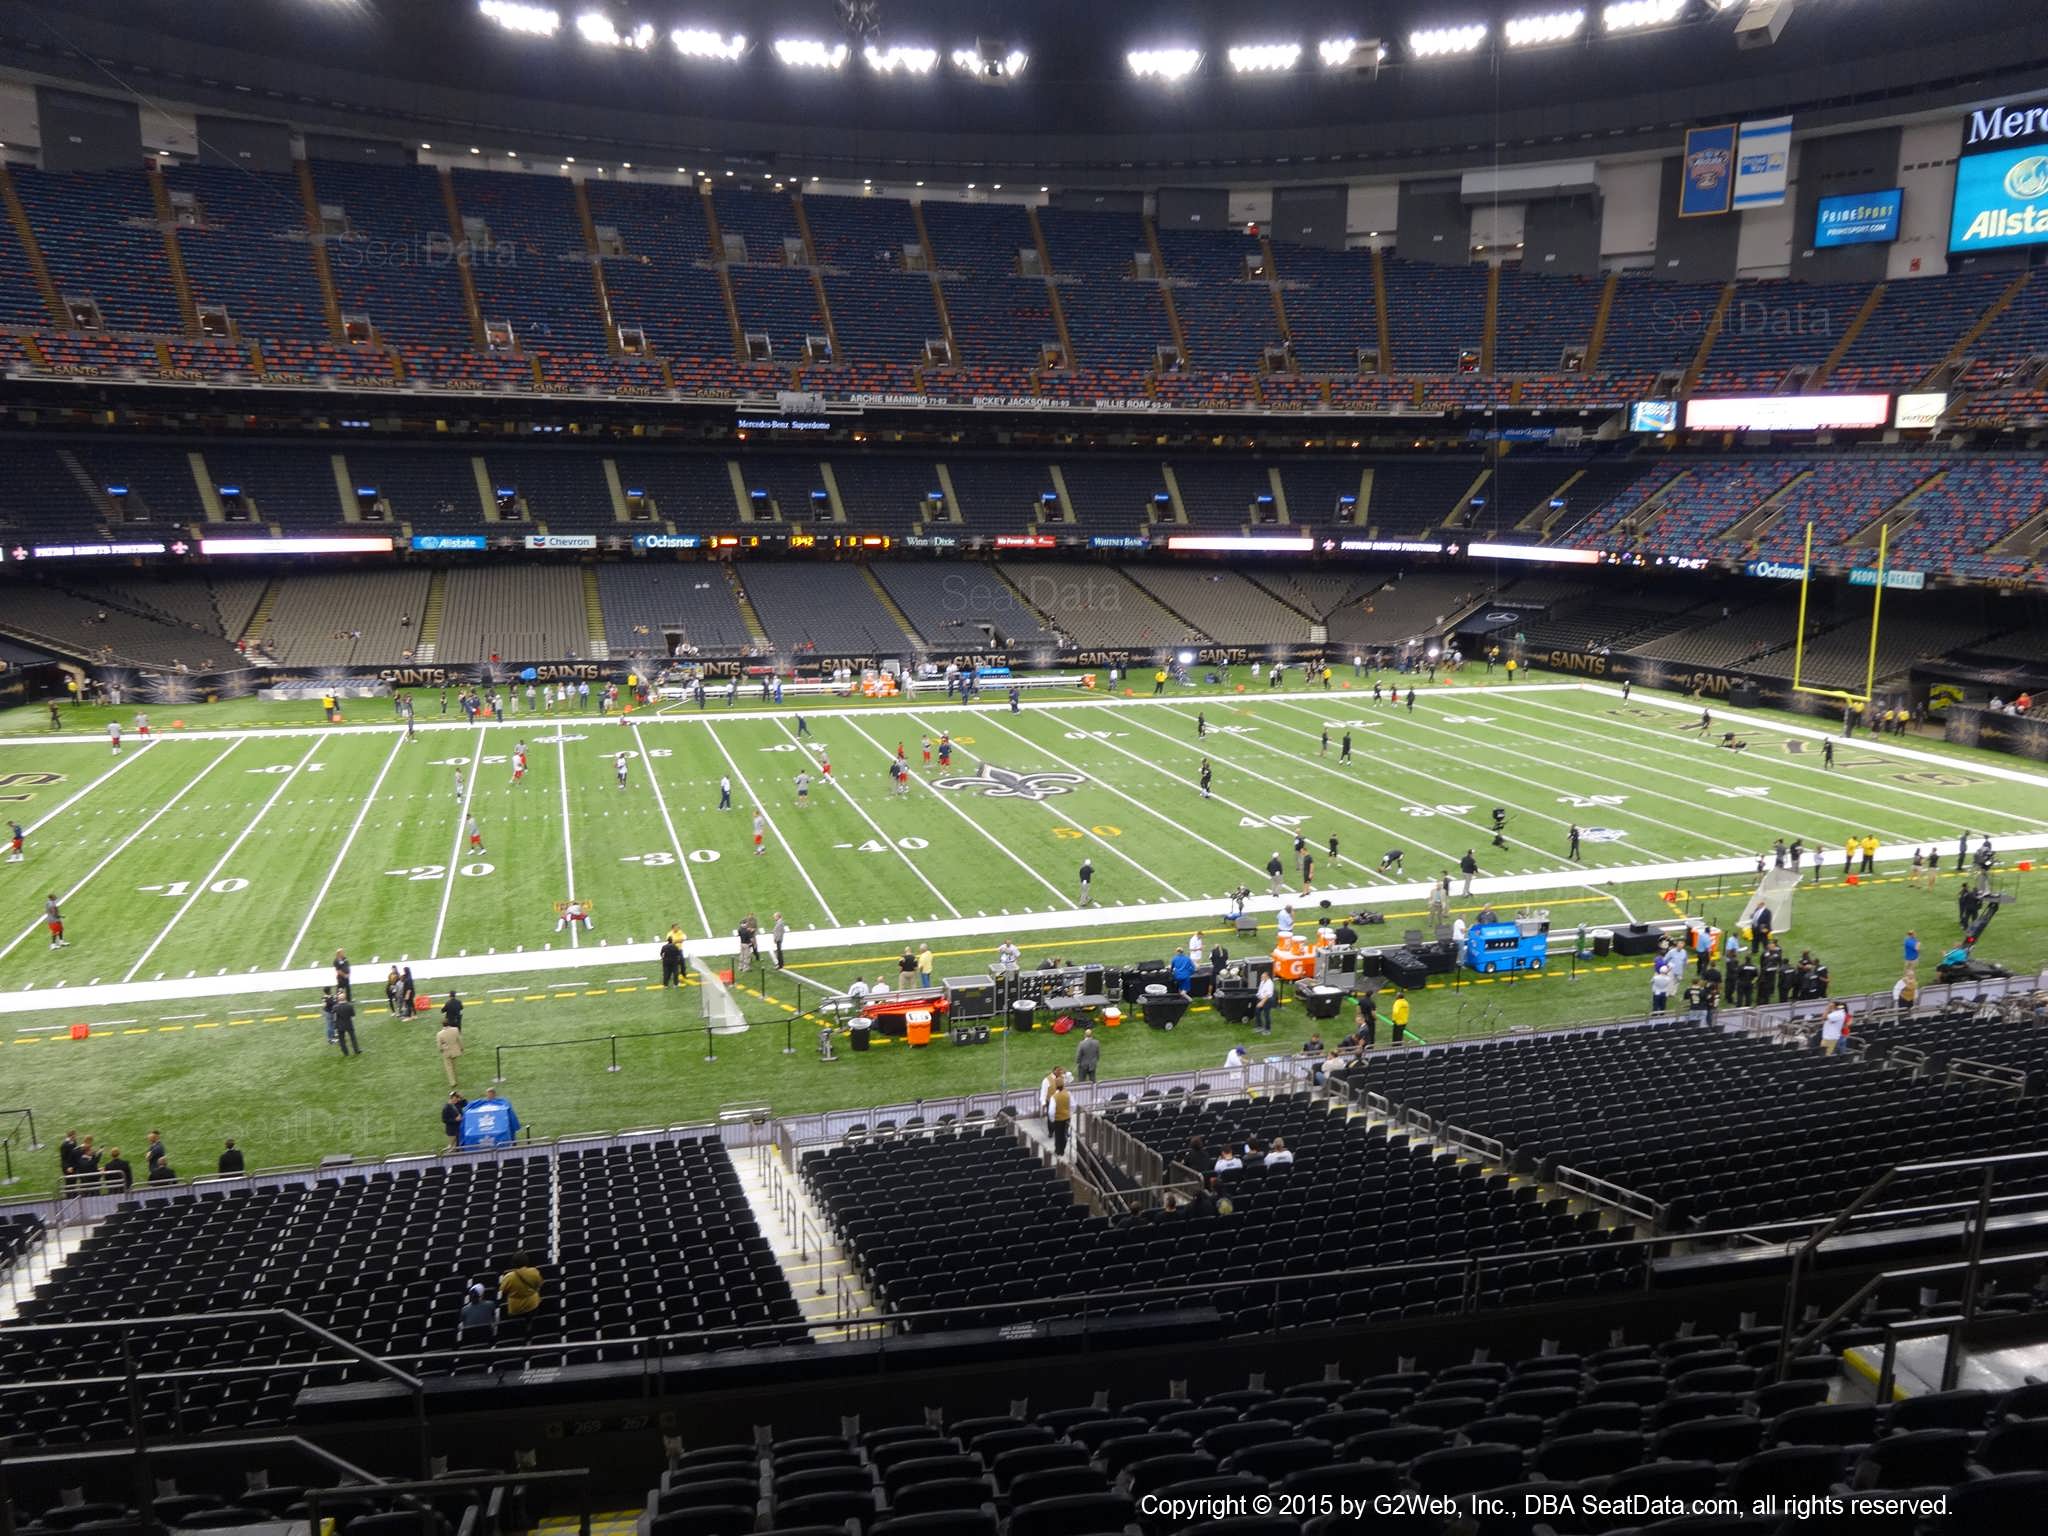 Seat view from section 338 at the Mercedes-Benz Superdome, home of the New Orleans Saints